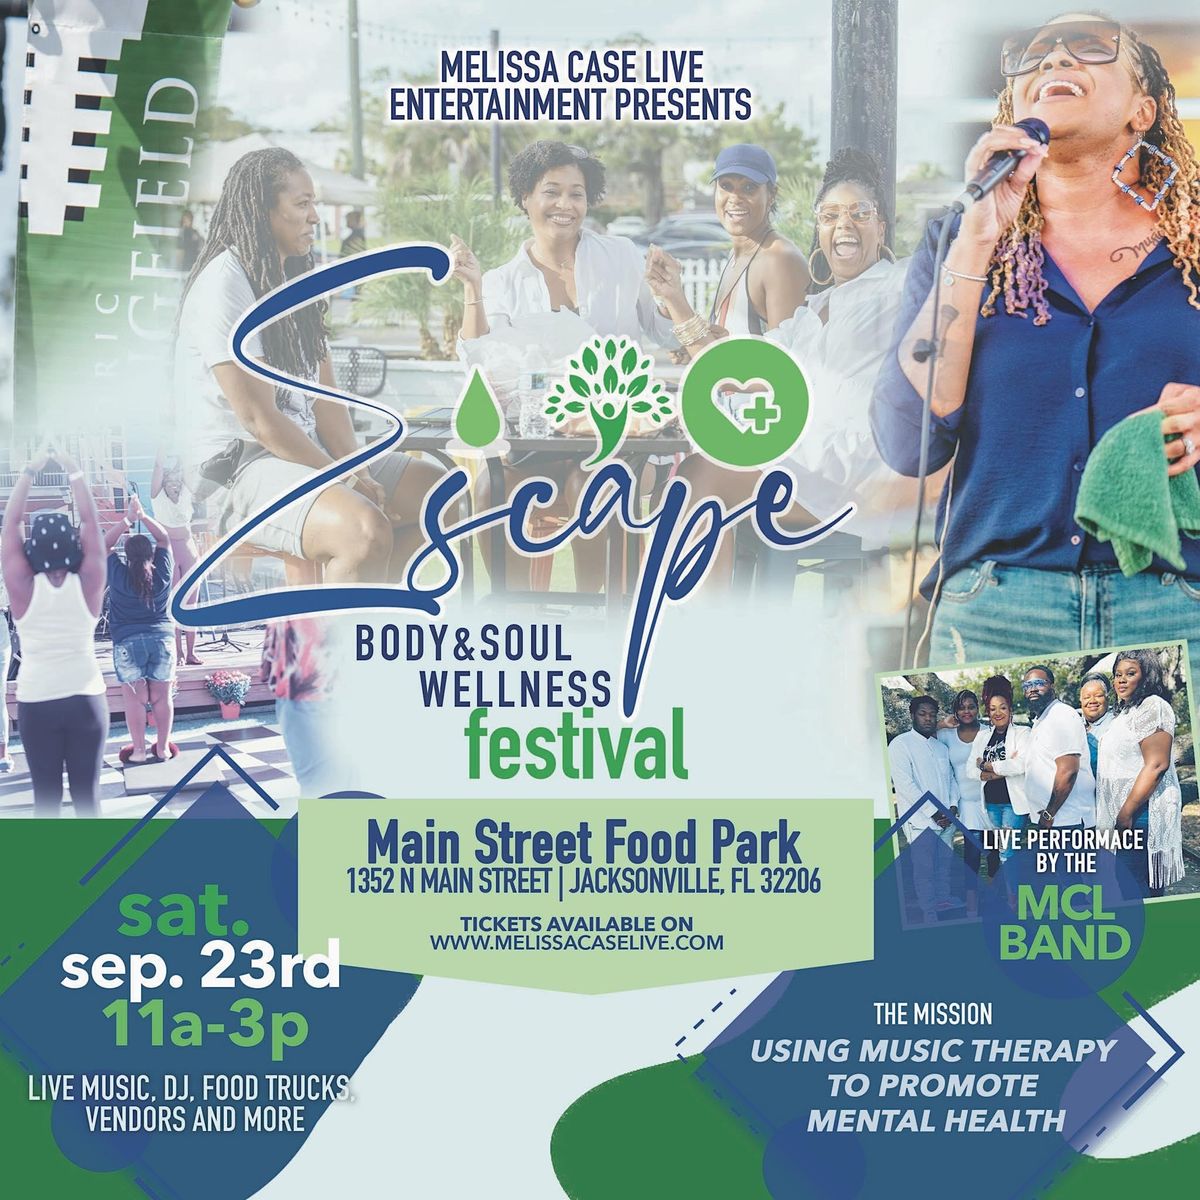 Escape: Body and Soul Wellness Festival by Melissa Case Live, Ent